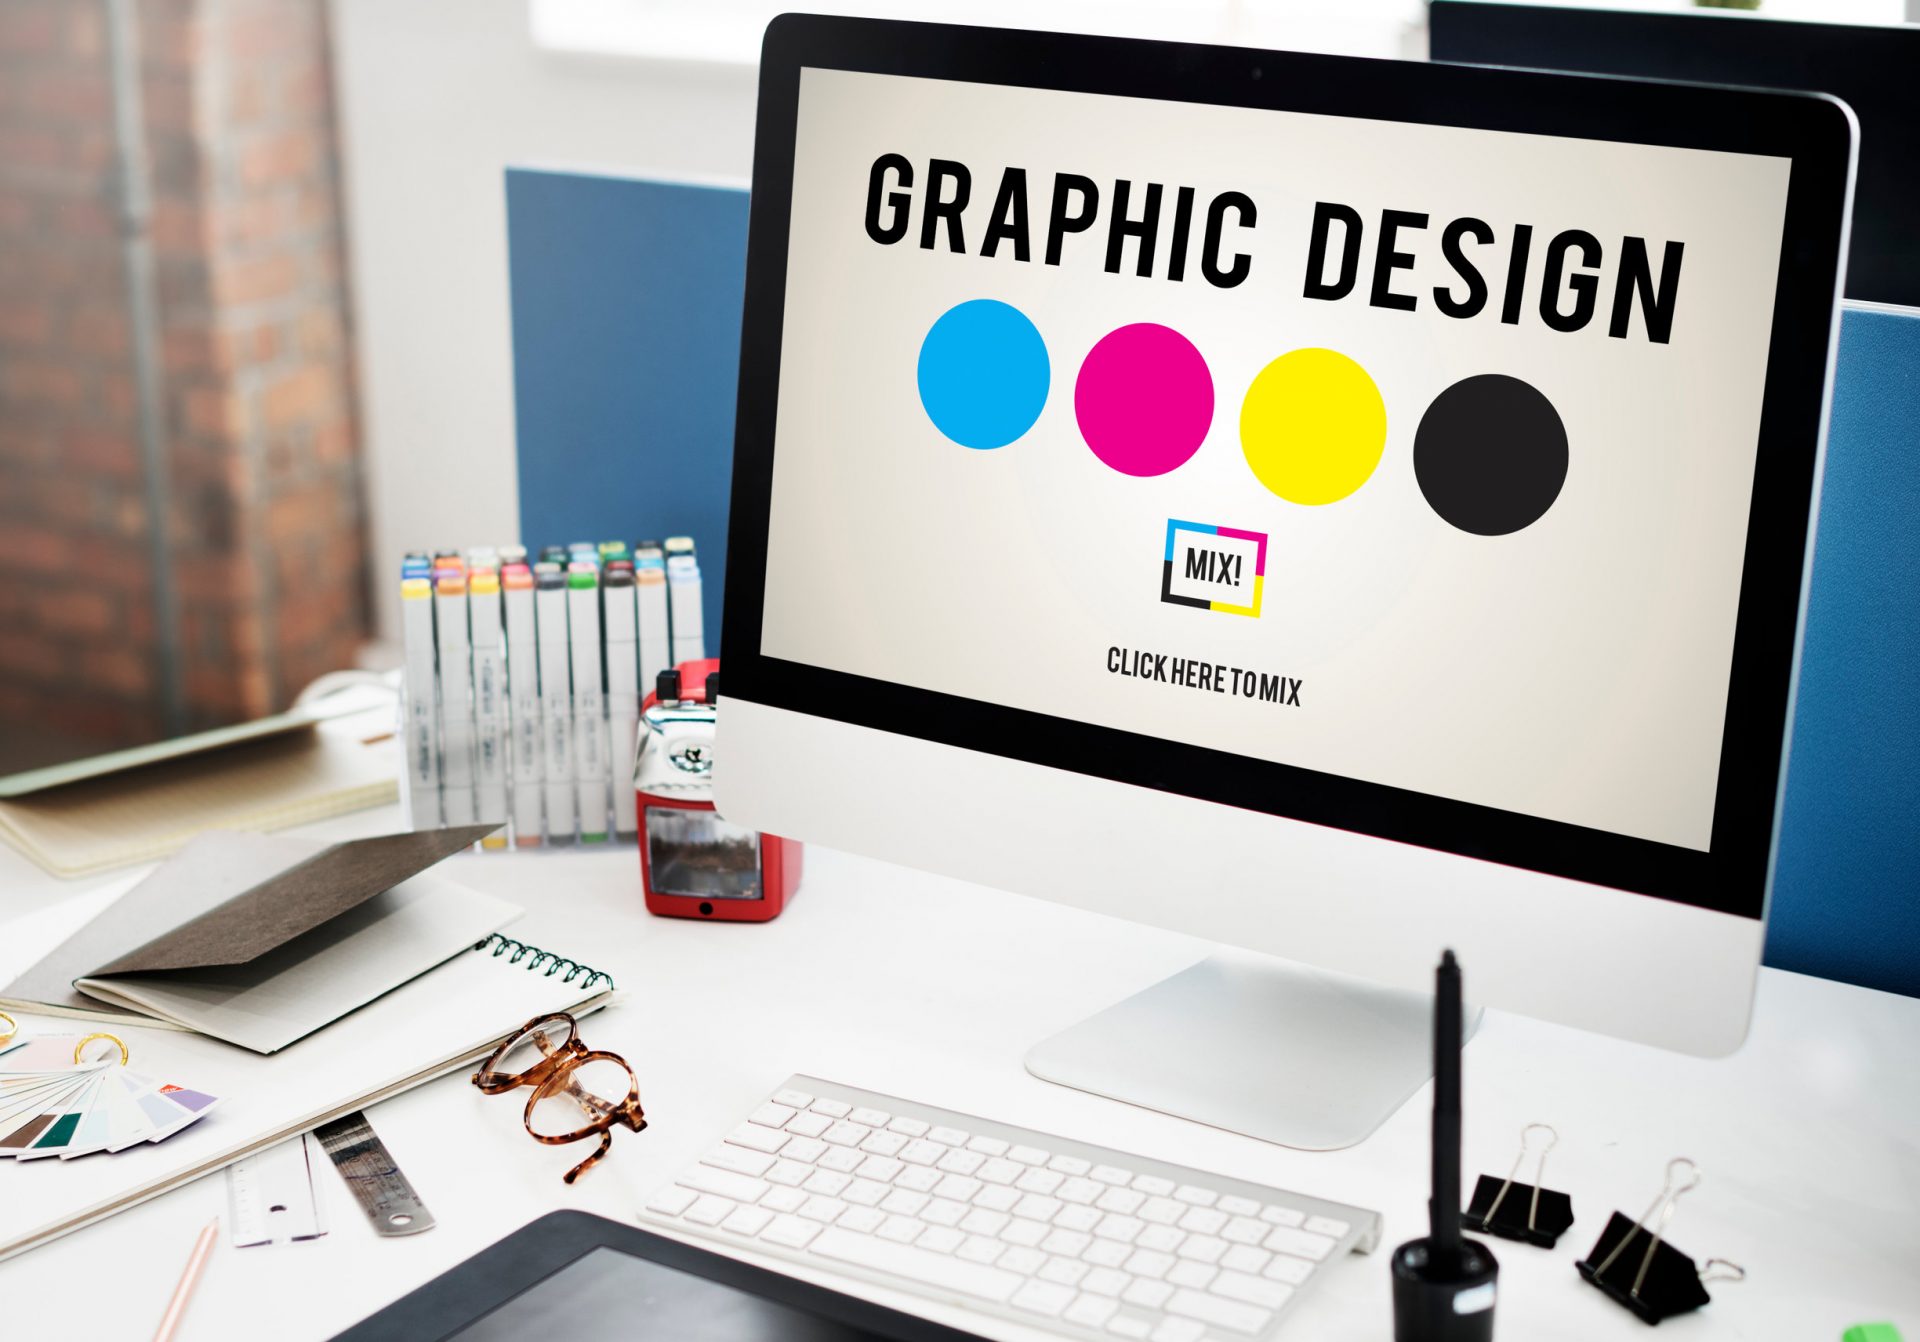 An image of a laptop with the words "Graphic Design" and some color swatches to show that I provide graphic design consulting services for wellness businesses